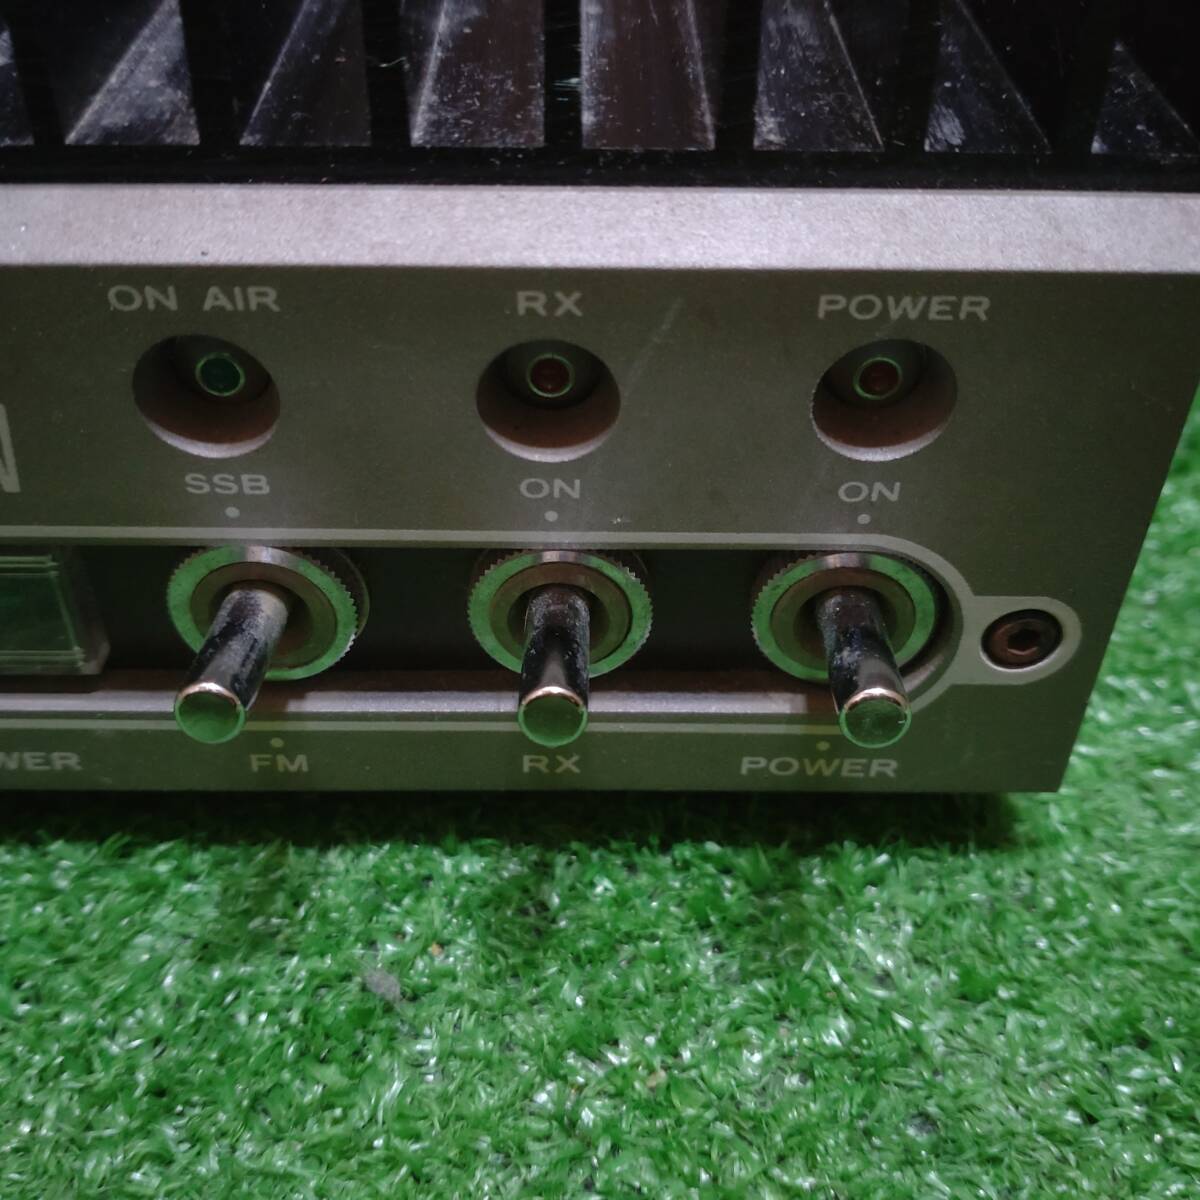  Tokyo high power made 144MHz linear amplifier HL-80V present condition goods [T17722]